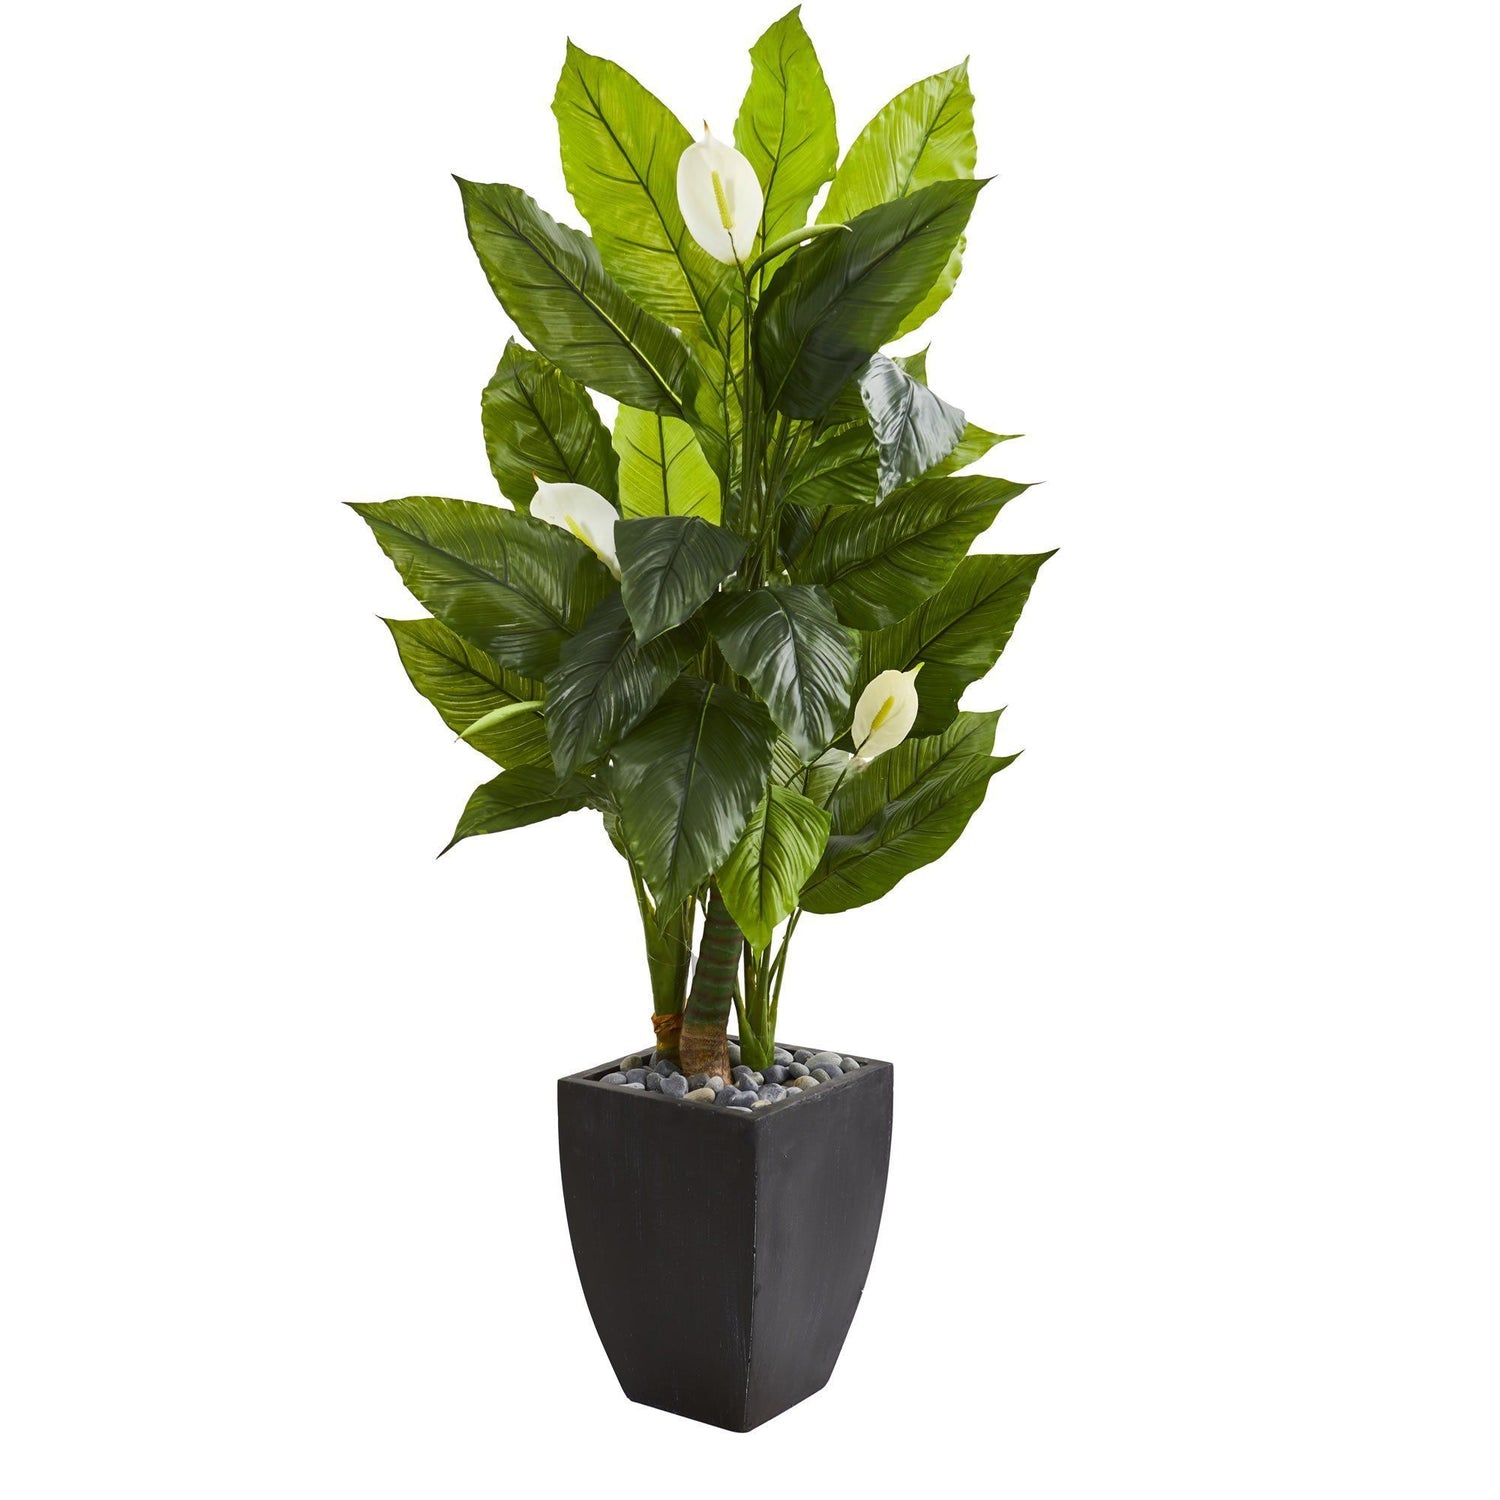 63” Spathyfillum Artificial Plant in Black Planter (Real Touch)